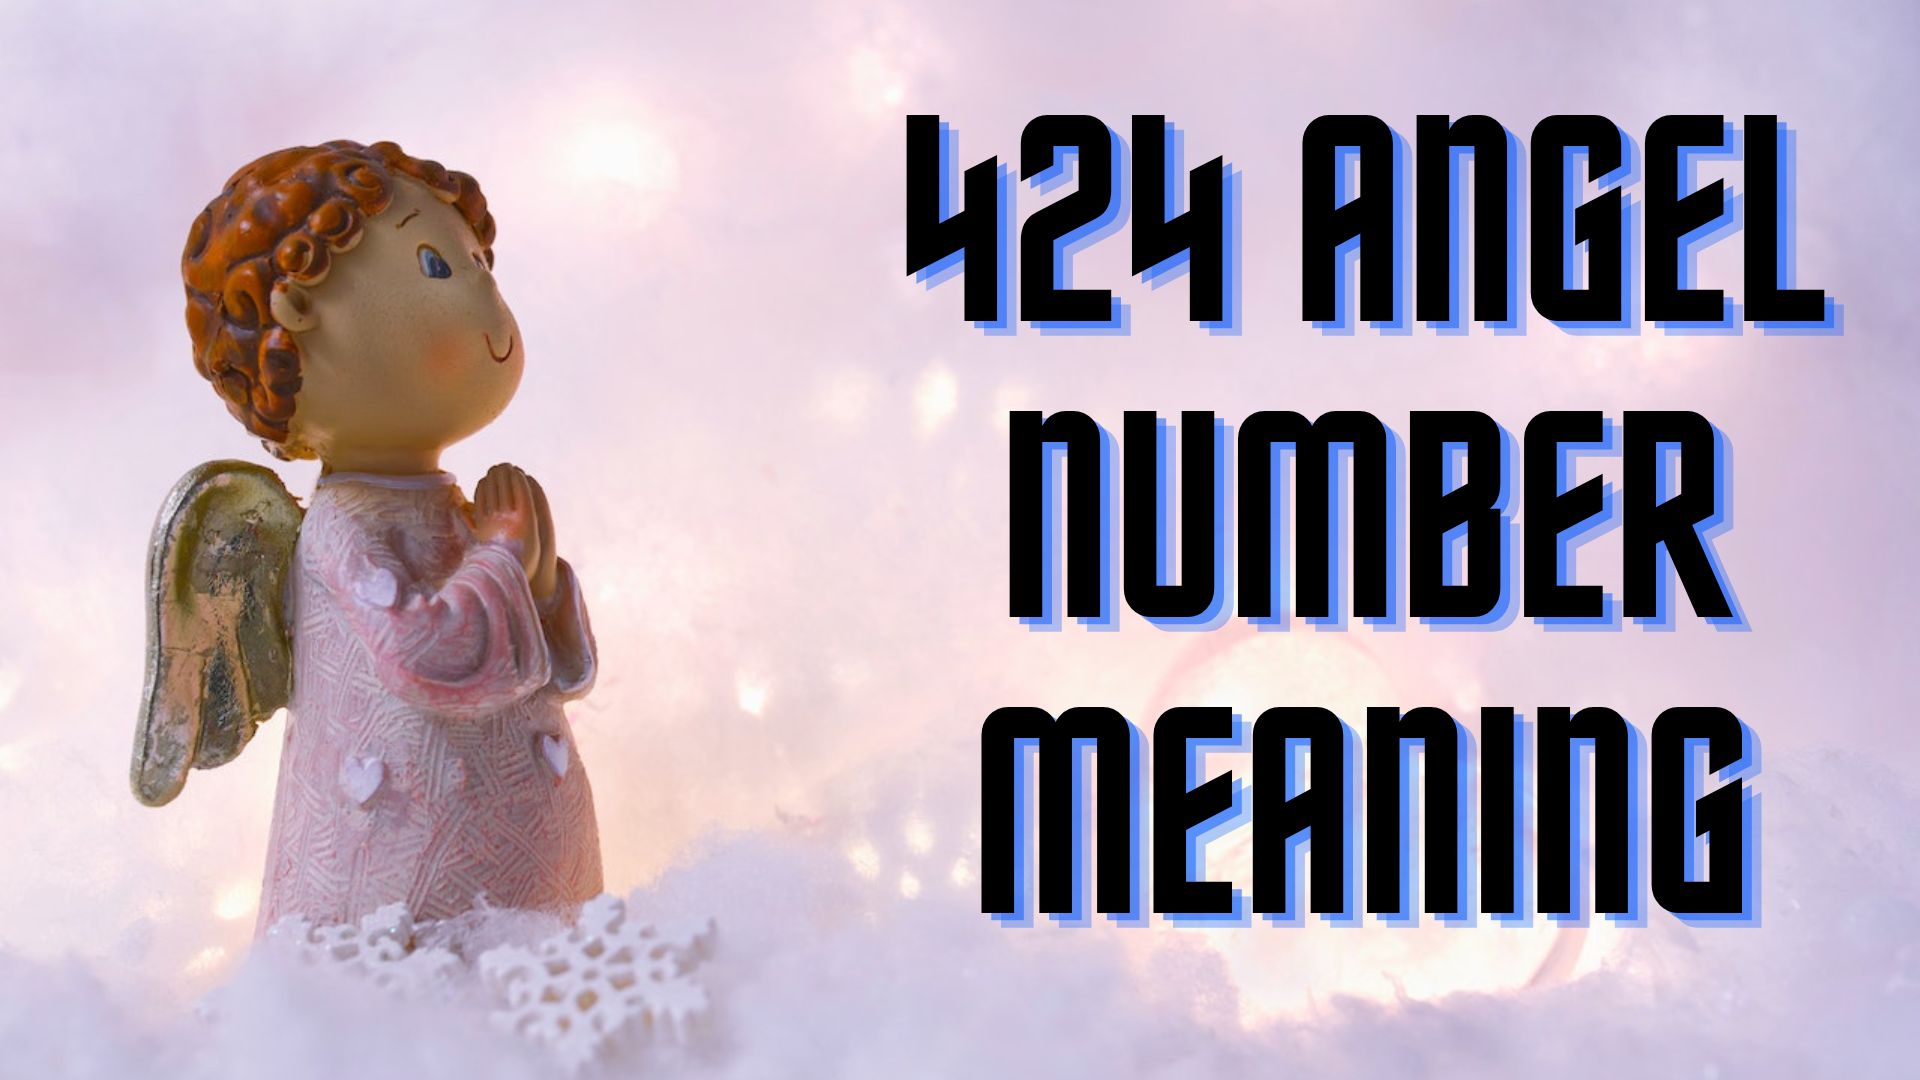 424 Angel Number Meaning - Take A Stand For A Reason